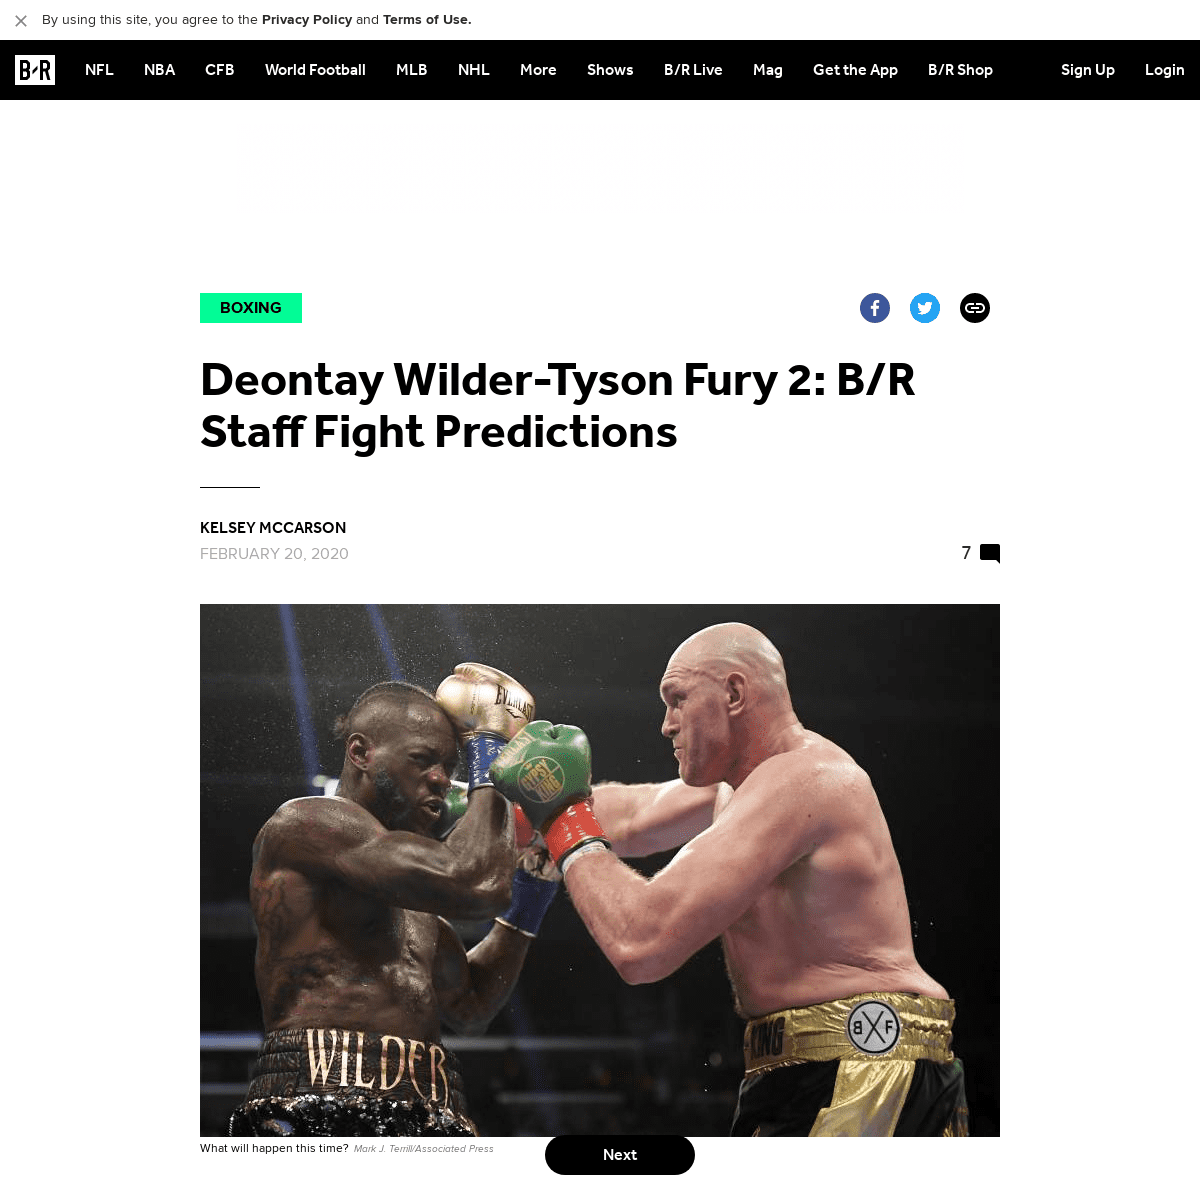 A complete backup of bleacherreport.com/articles/2877156-deontay-wilder-tyson-fury-2-br-staff-fight-predictions